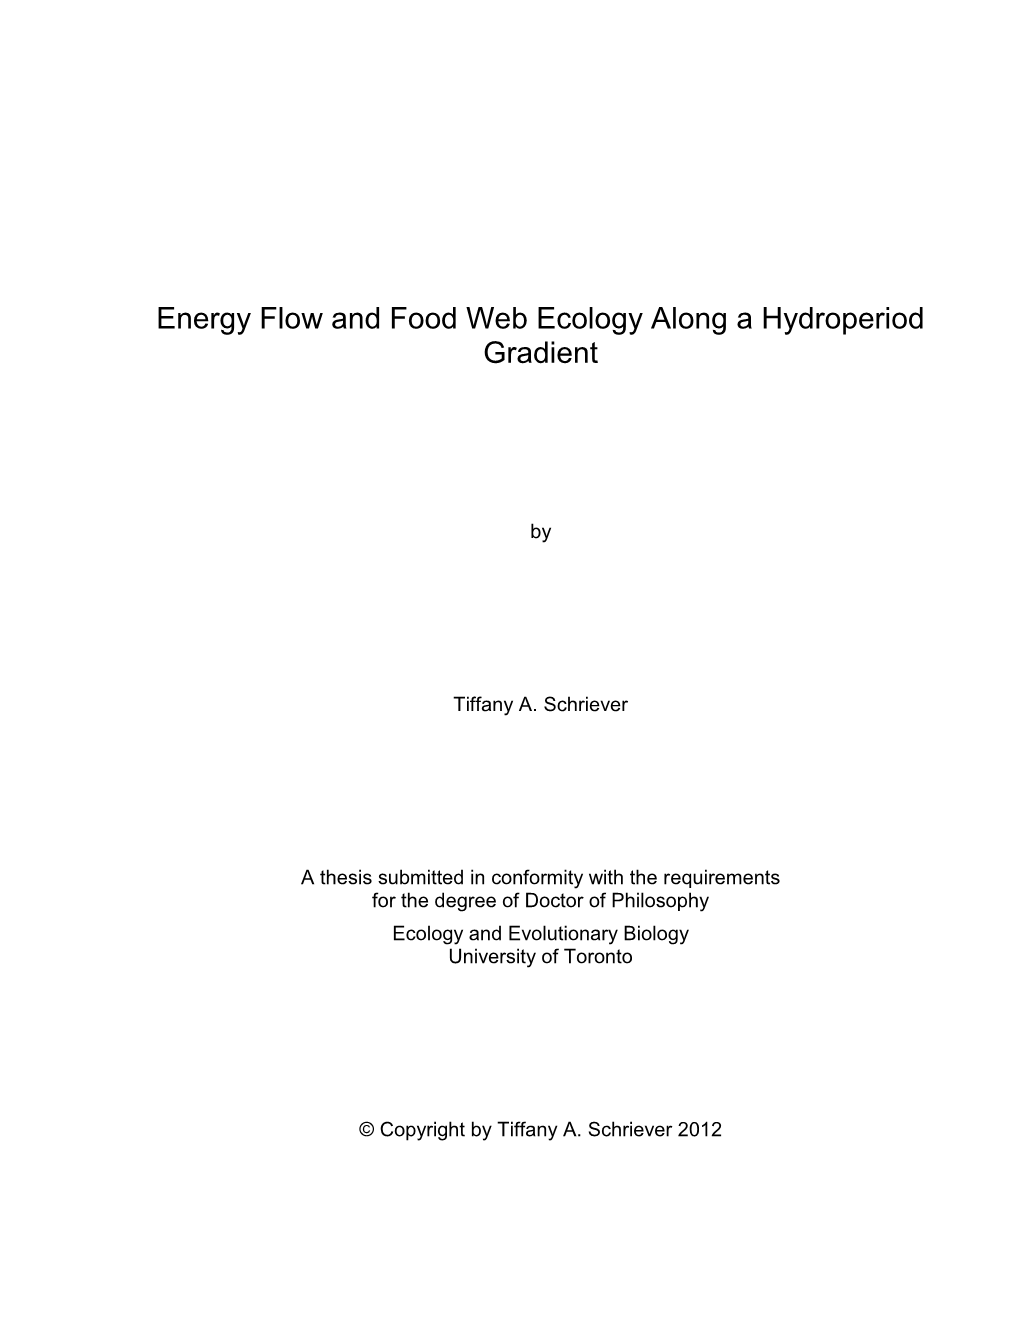 Energy Flow and Food Web Ecology Along a Hydroperiod Gradient